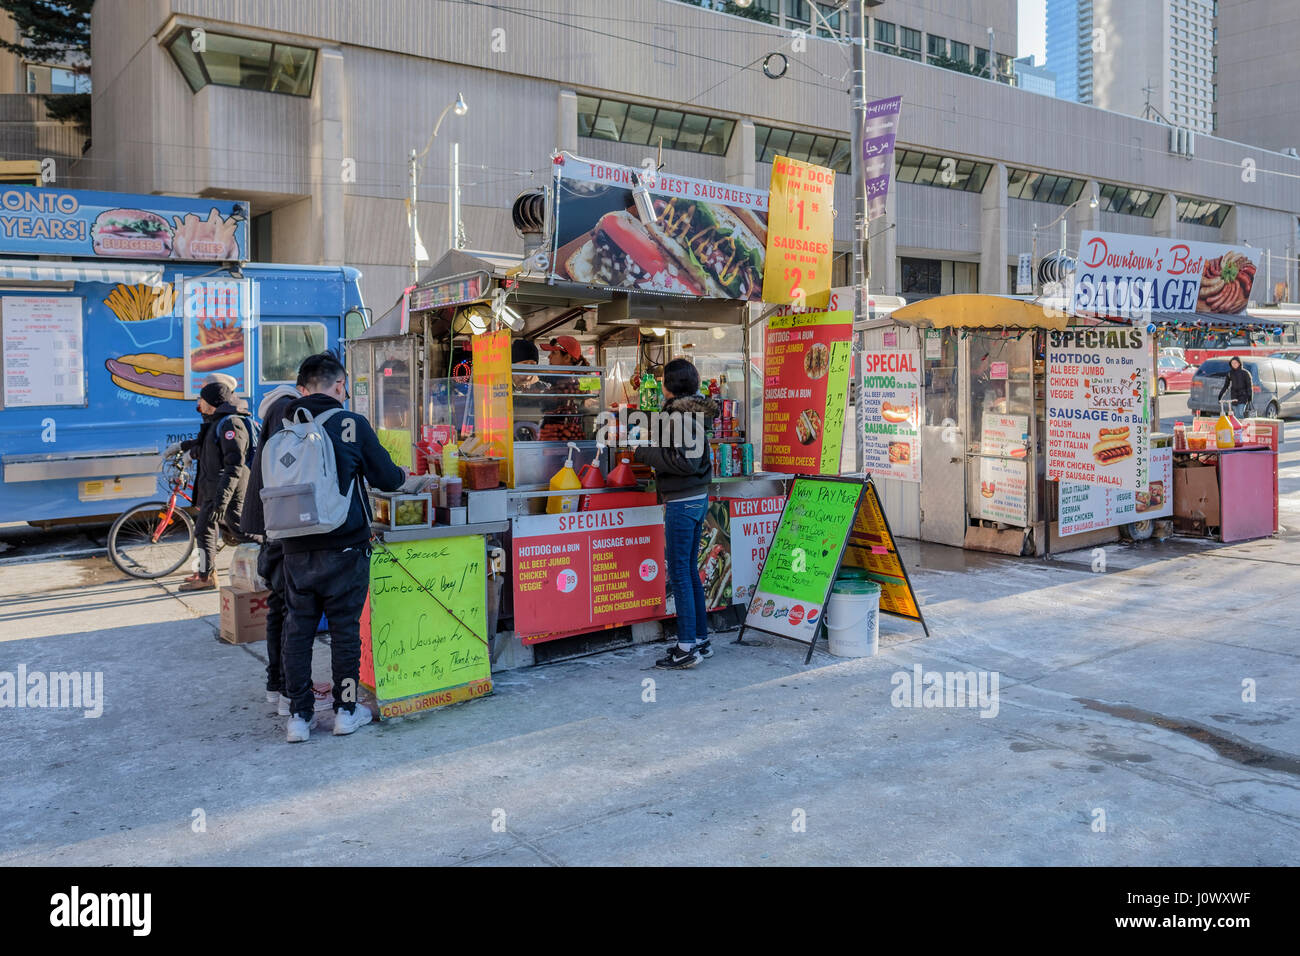 Street food vendors, carts, selling hot-dogs and sausage sandwiches at Queen Street, Nathan Phillips Square, in downtown Toronto, Ontario, Canada. Stock Photo